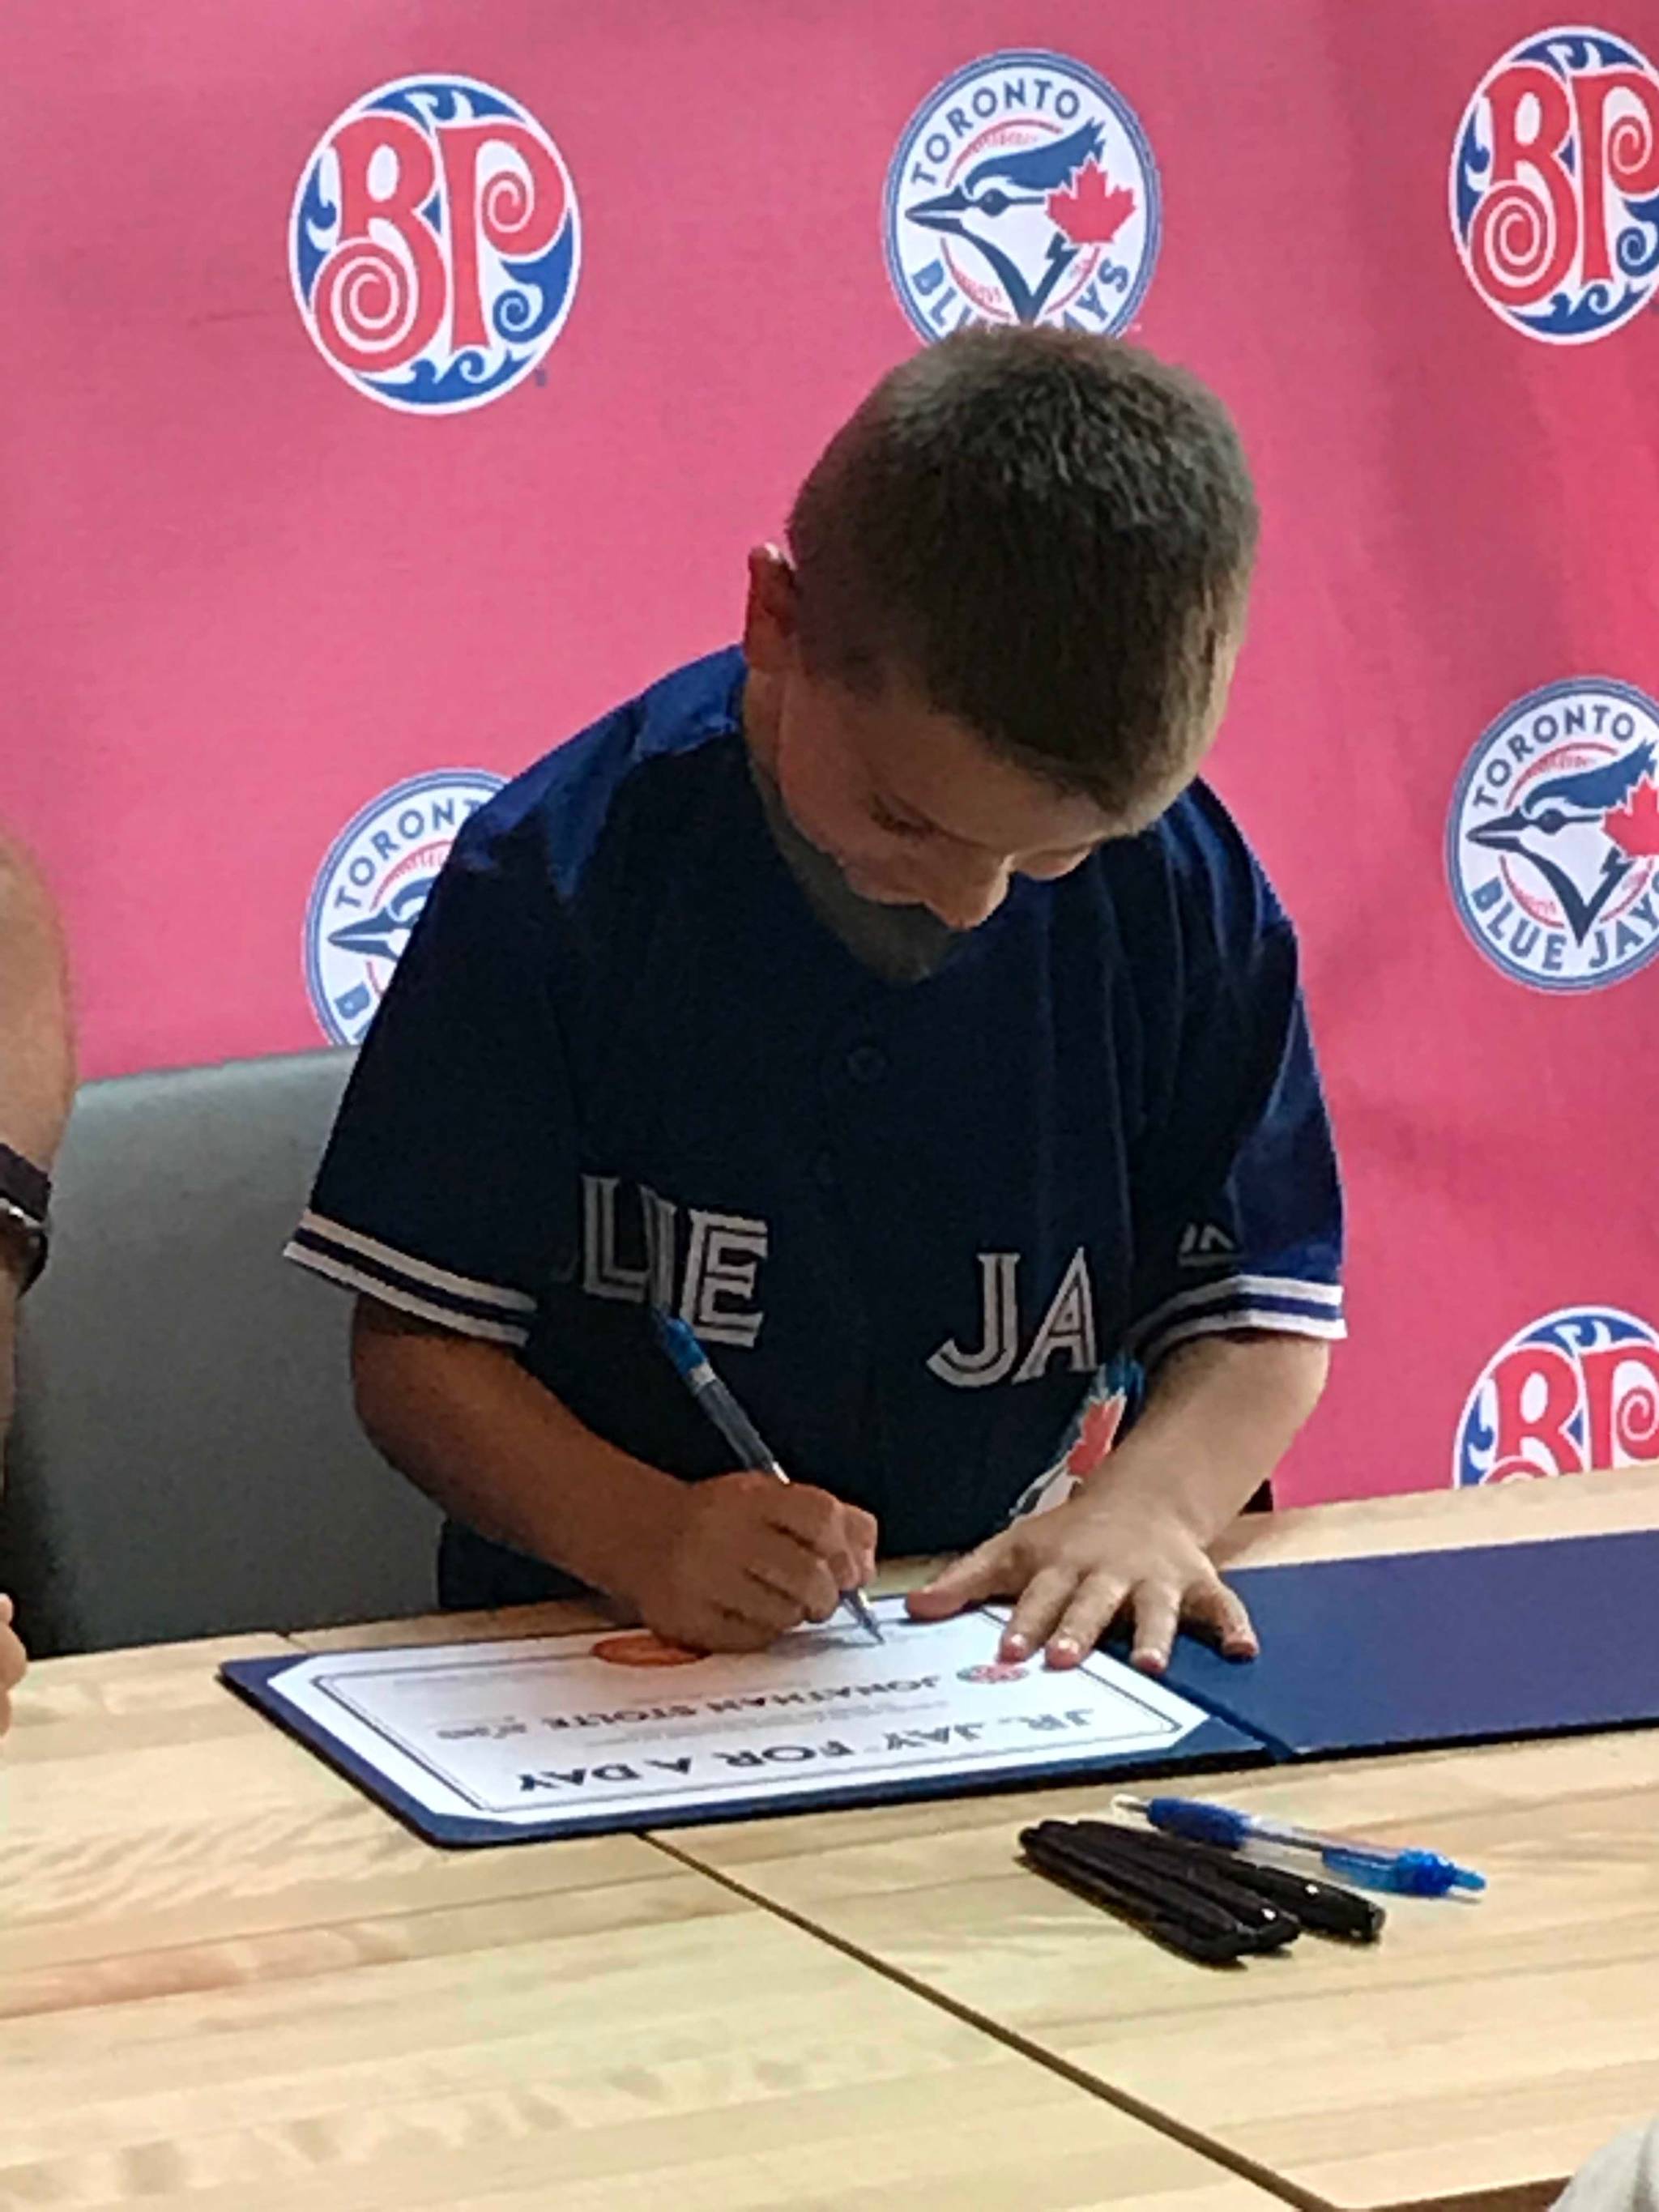 Blackfalds youngster signs one-day contract with Blue Jays at Rogers Centre